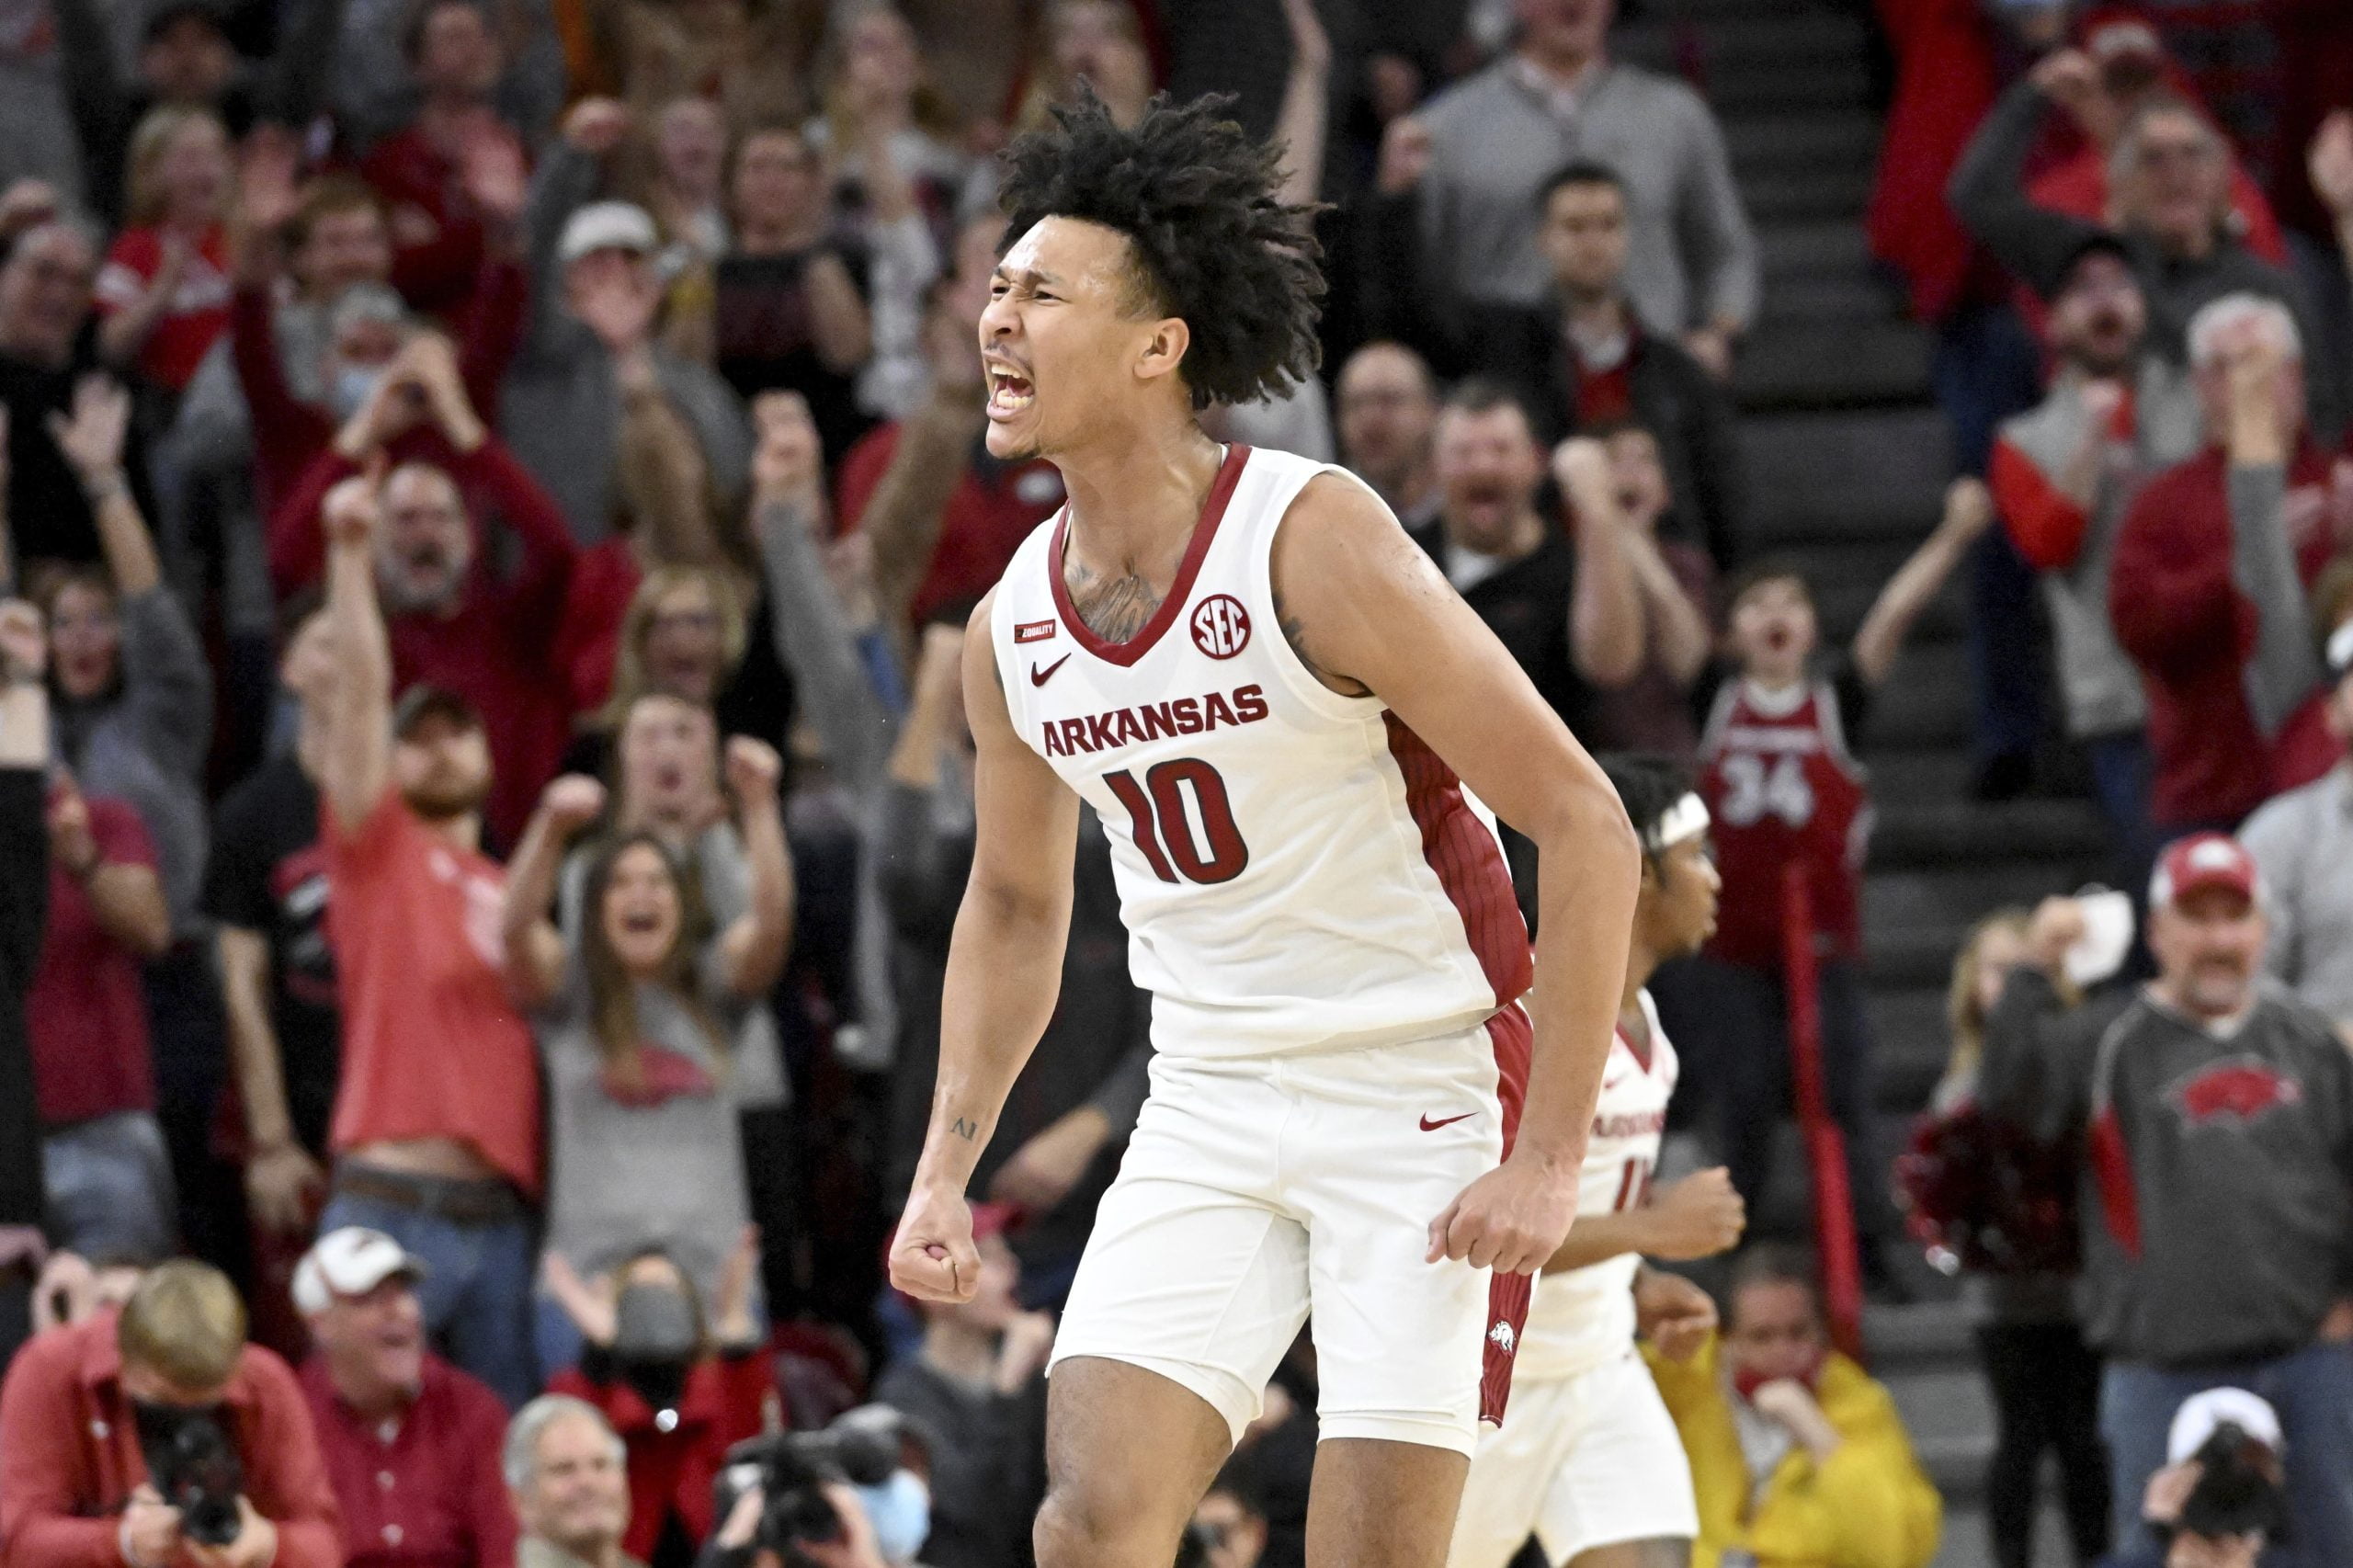 Arkansas holds off Texas A&M’s late rally, wins 76-73 in OT 1